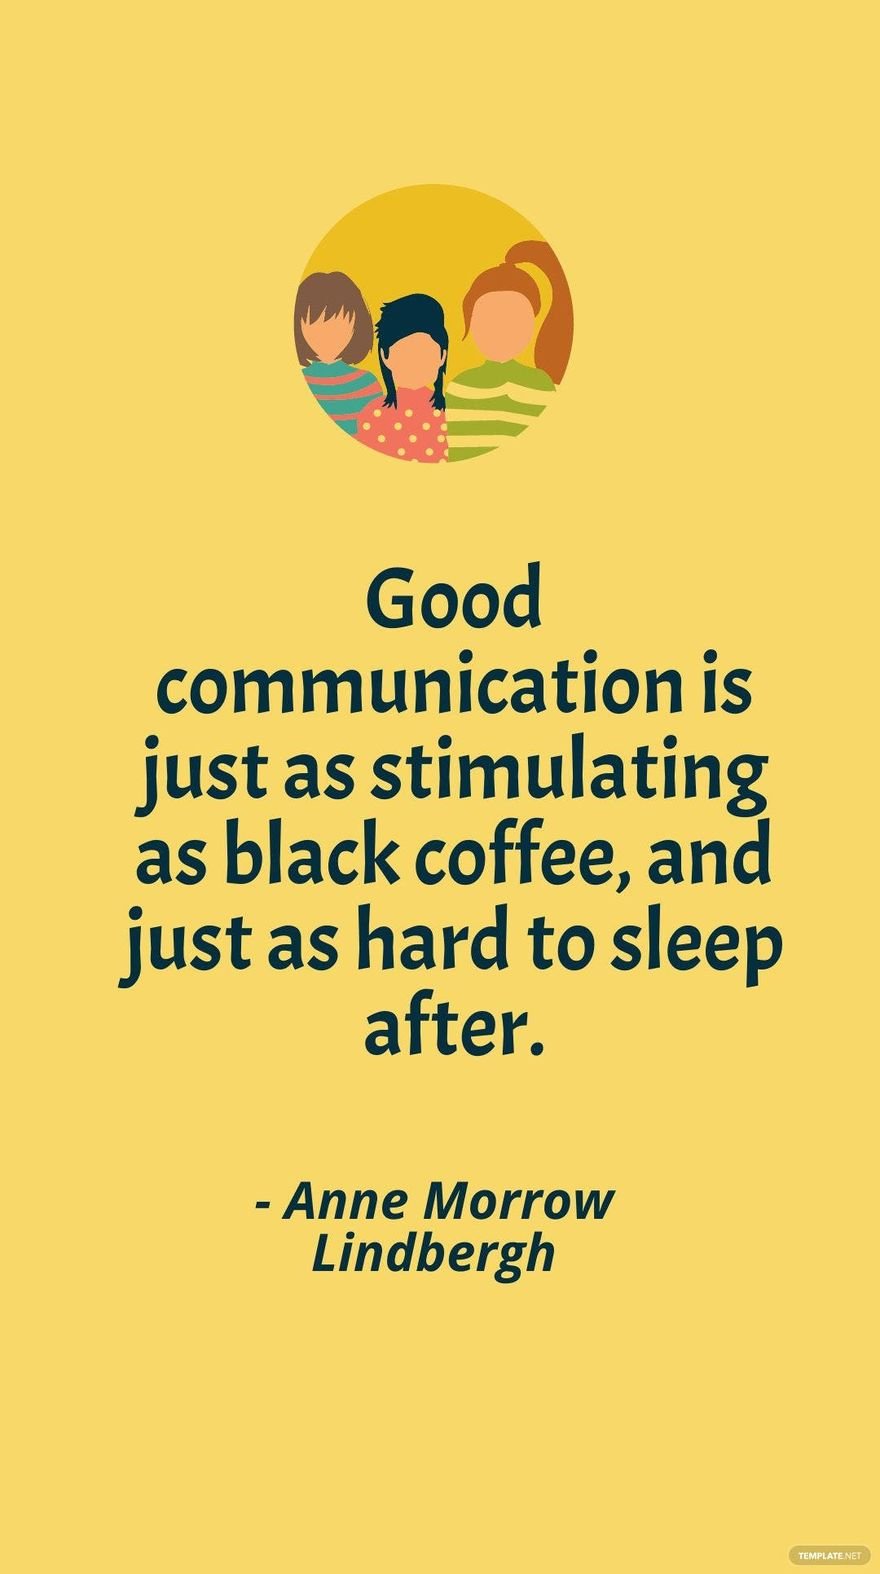 Free Anne Morrow Lindbergh - Good communication is just as stimulating as black coffee, and just as hard to sleep after. in JPG